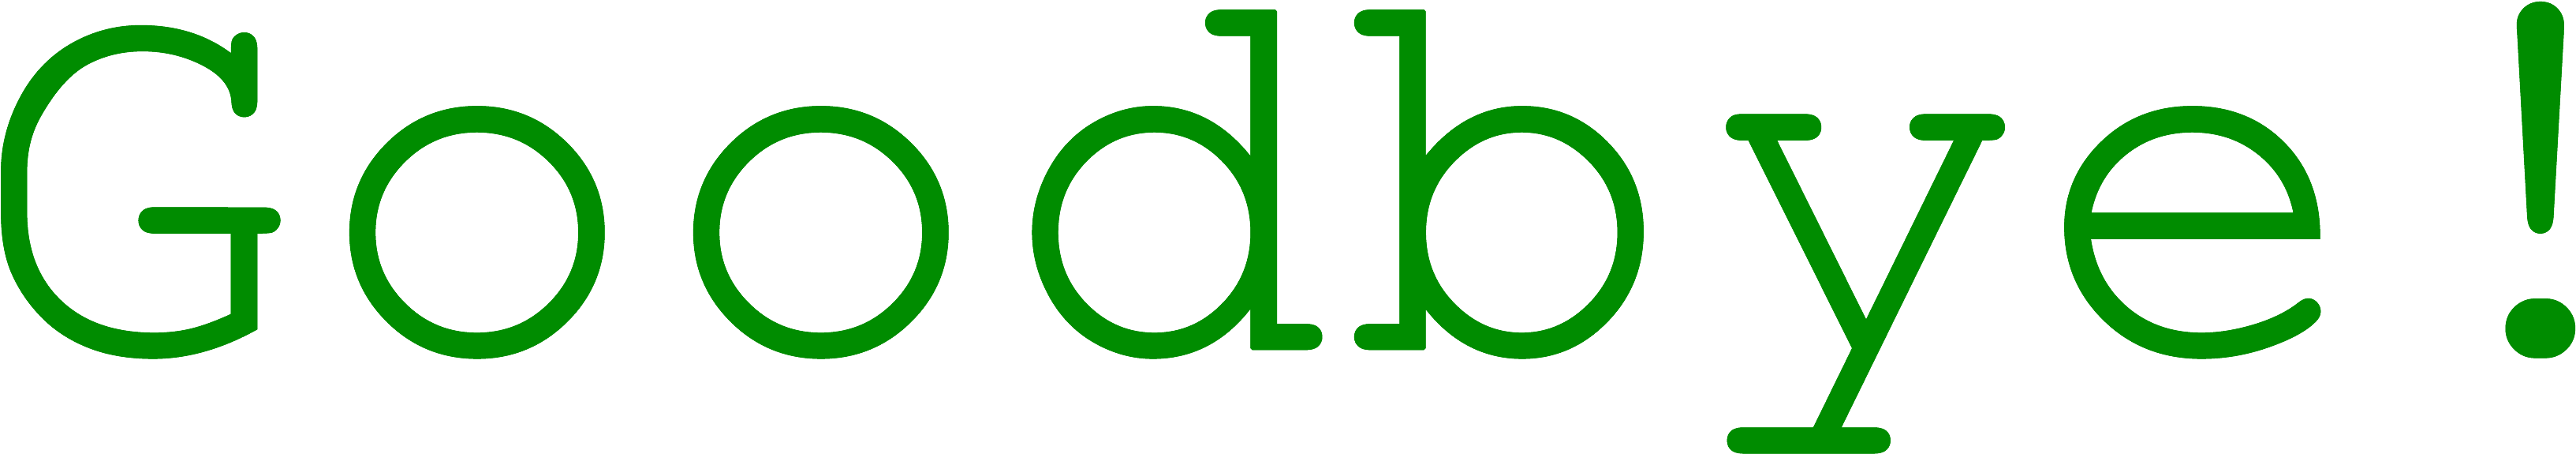 A Green Letters On A Black Background